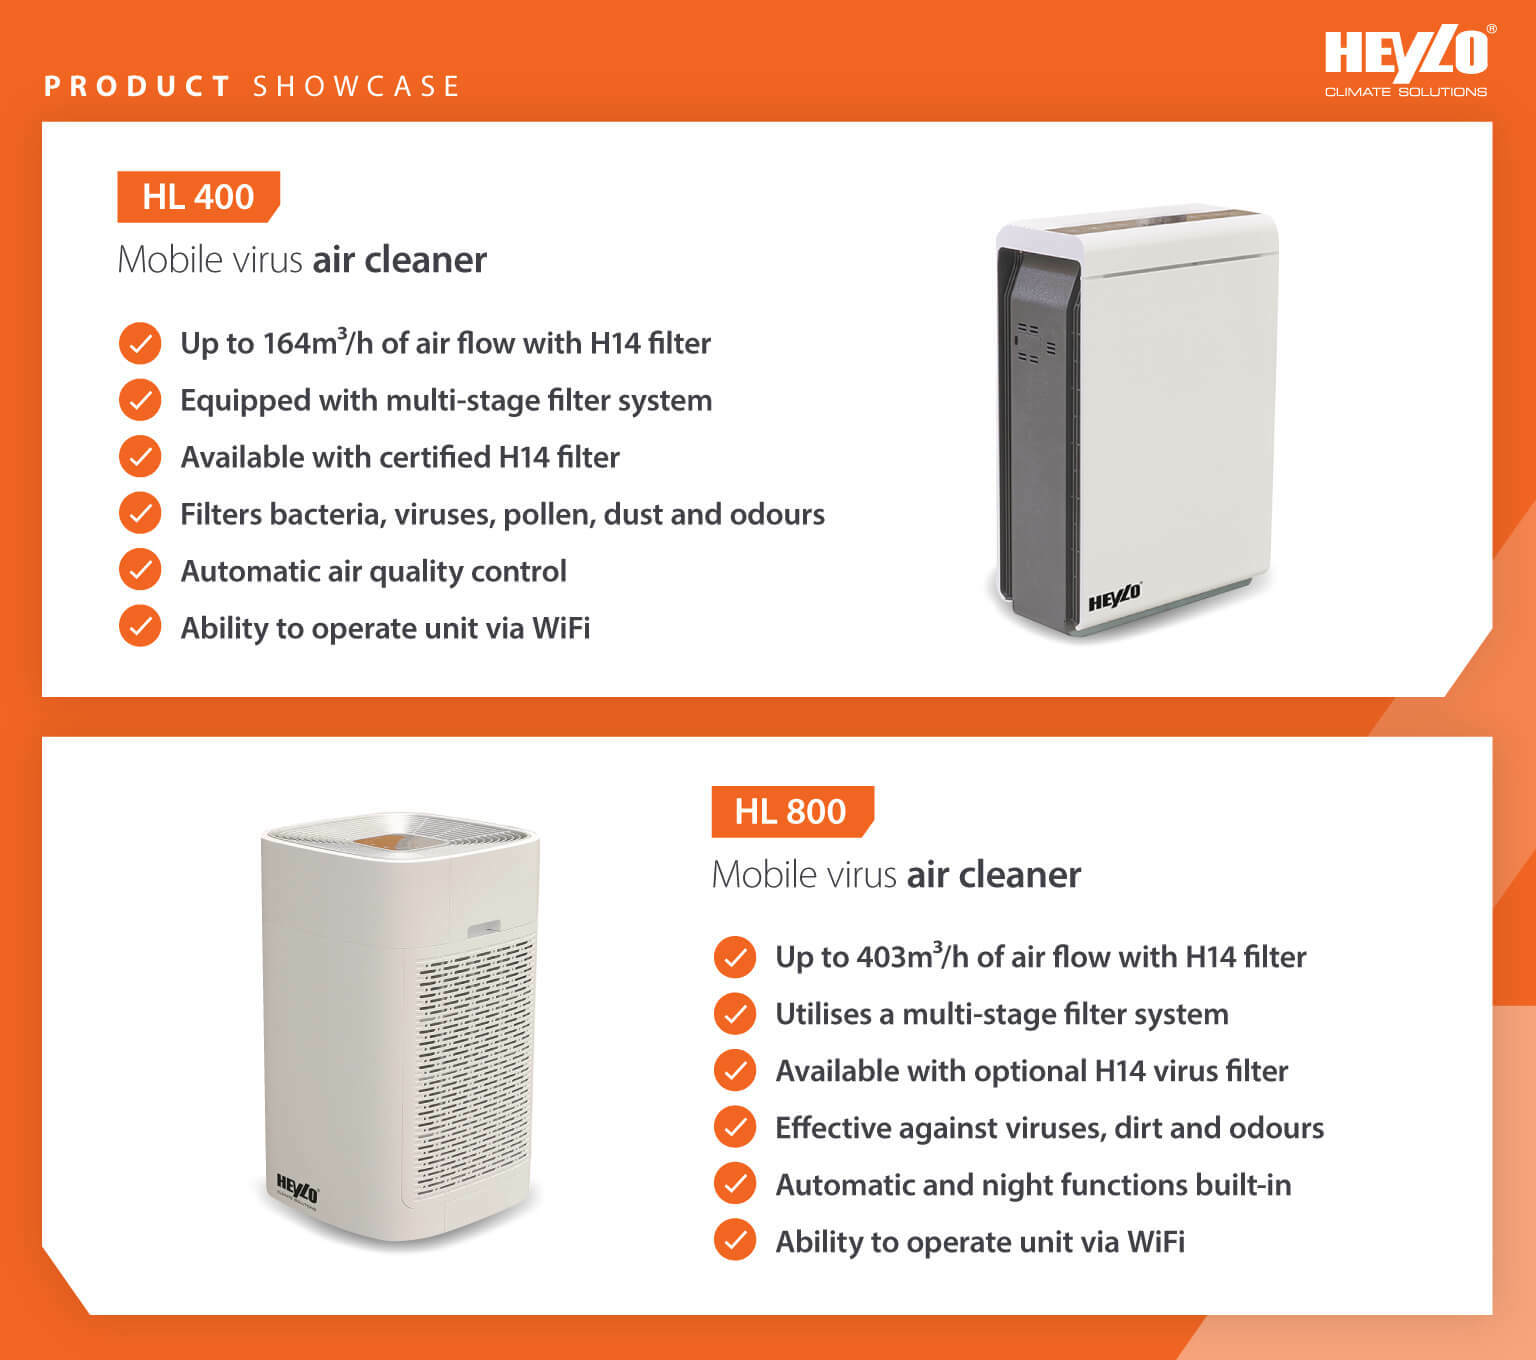 Heylo mobile virus air cleaners product showcase comparing the HL 400 and HL 800 models